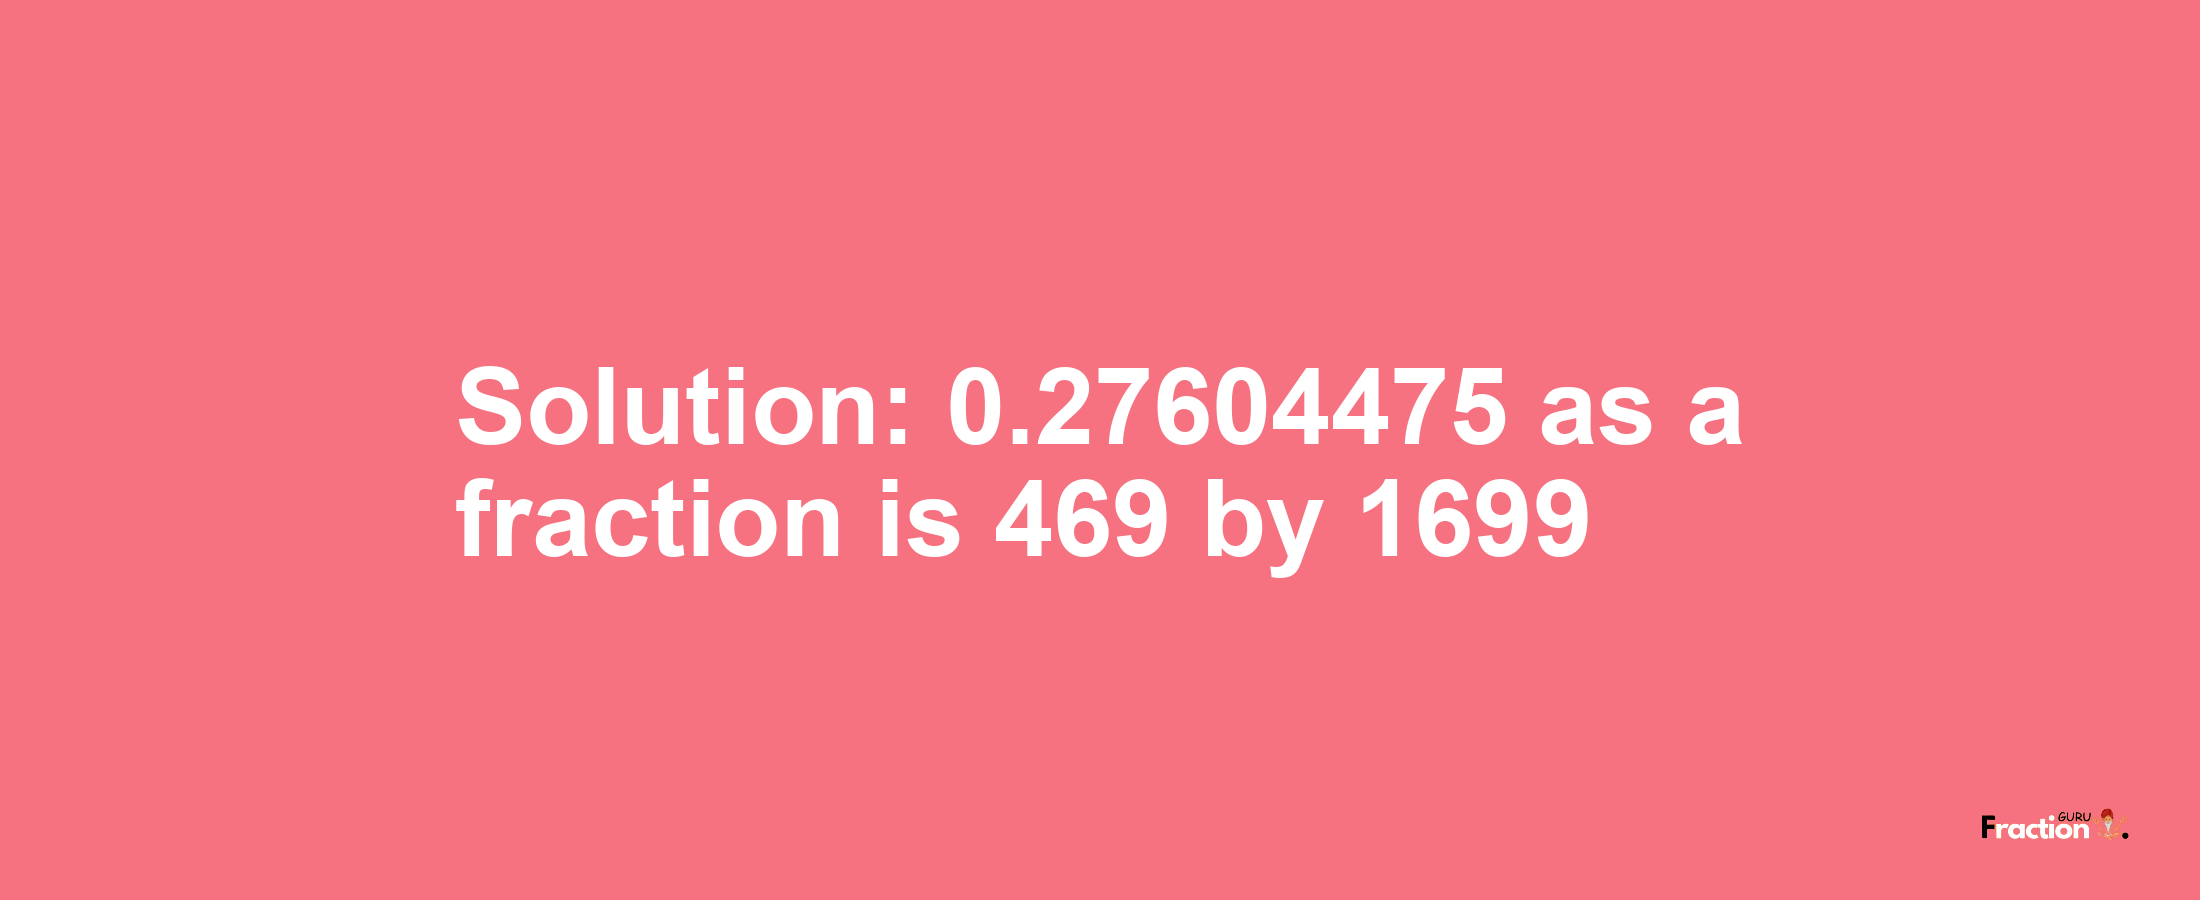 Solution:0.27604475 as a fraction is 469/1699